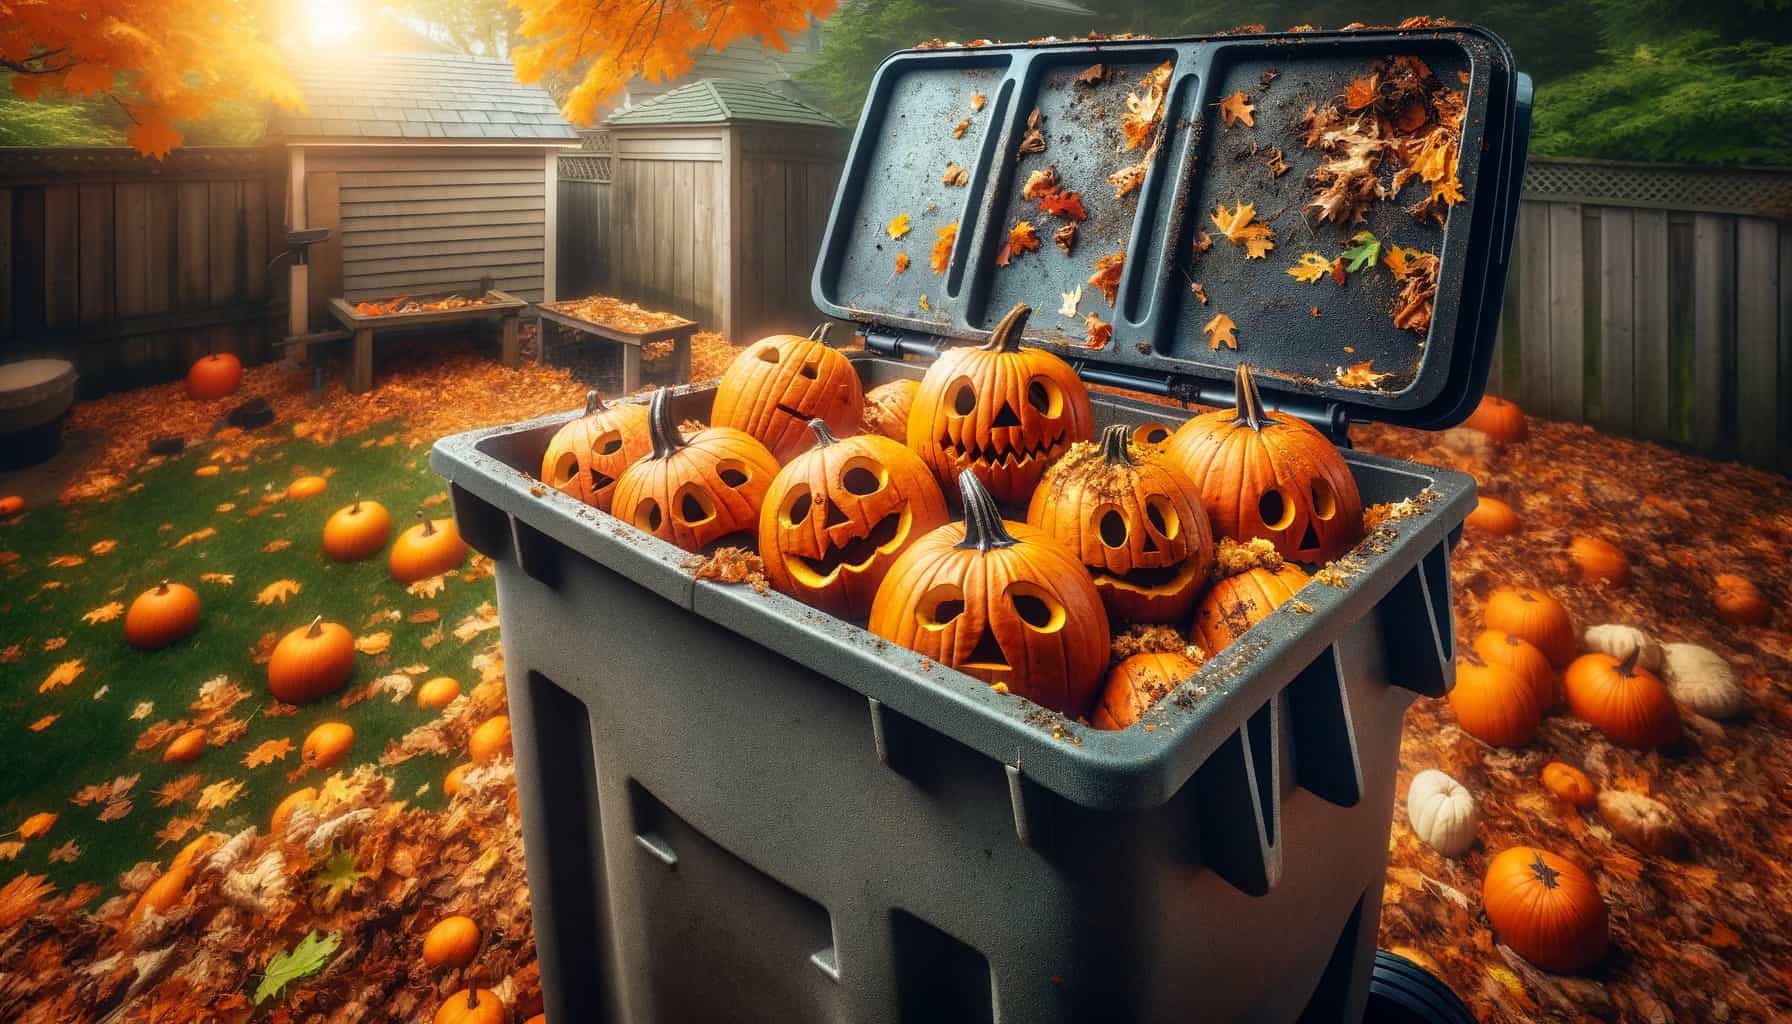 A trash can filled with pumpkins in a backyard for composting